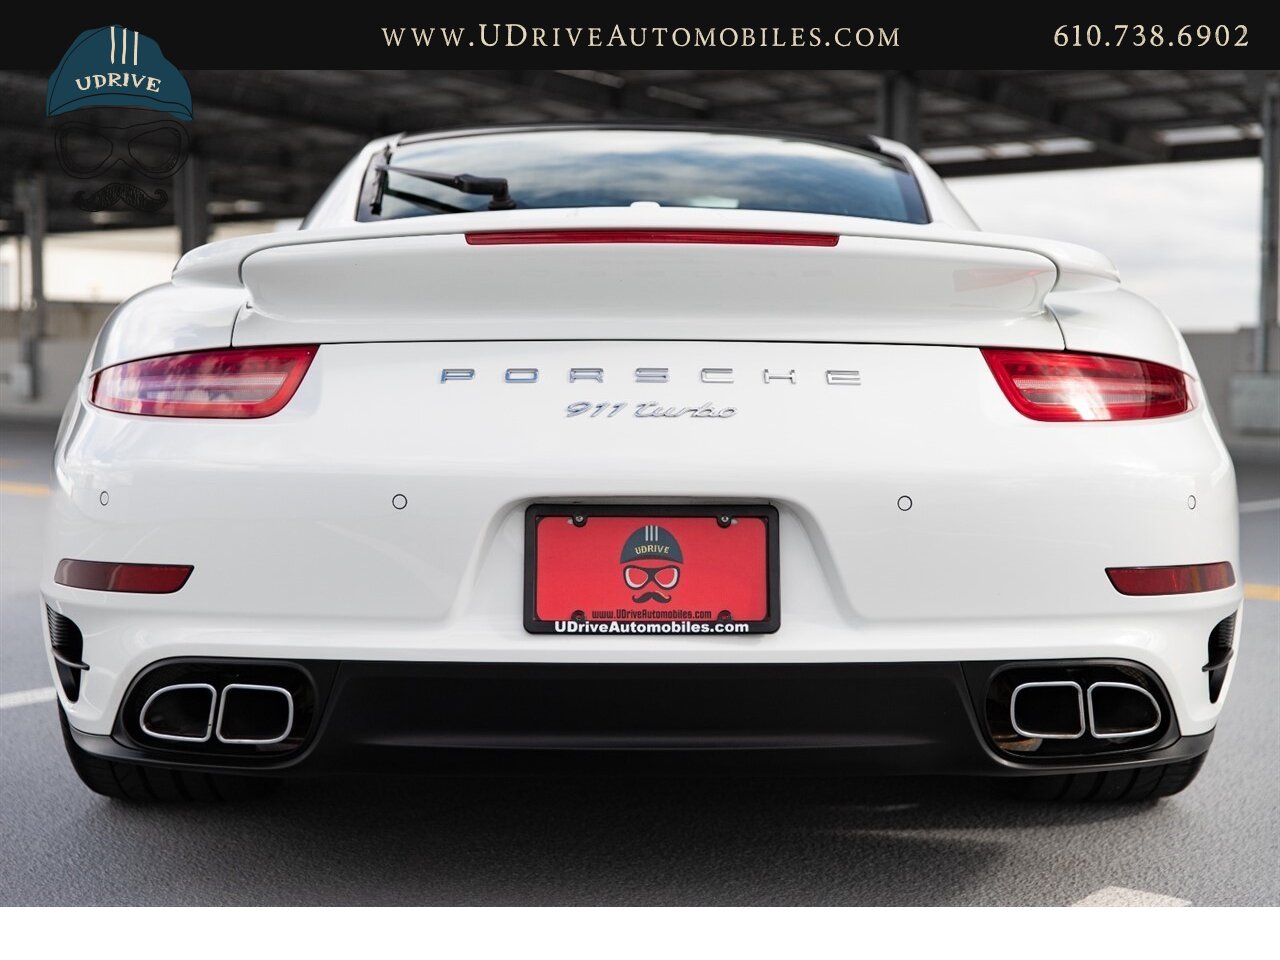 2014 Porsche 911 Turbo 12k Miles White over Black Chrono Rear Wiper  Sport Seats 20in Turbo Whls Sunroof Red Belts - Photo 19 - West Chester, PA 19382